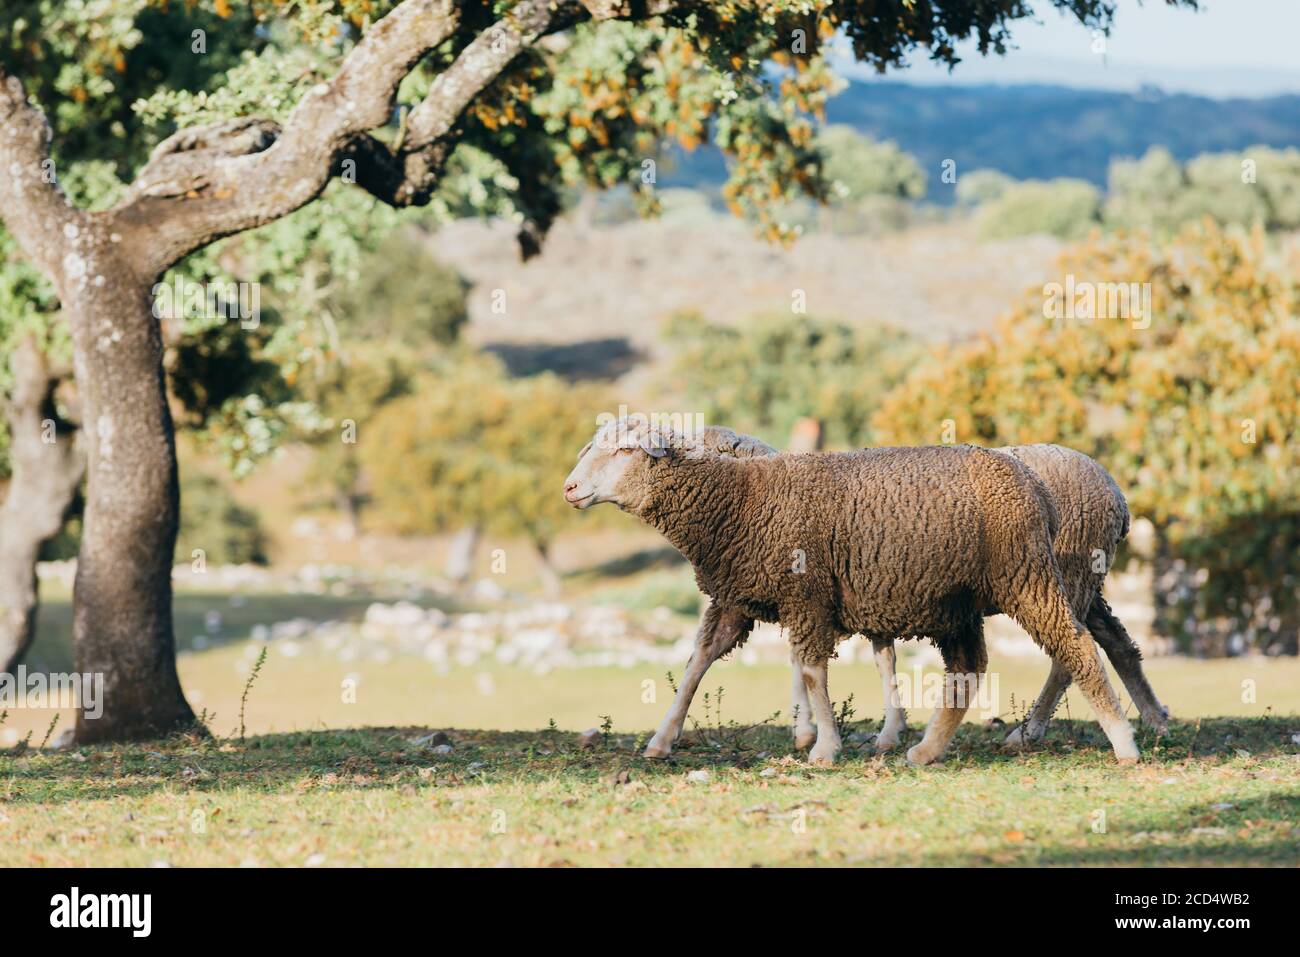 Sheeps grazing in the Field. Stock Photo